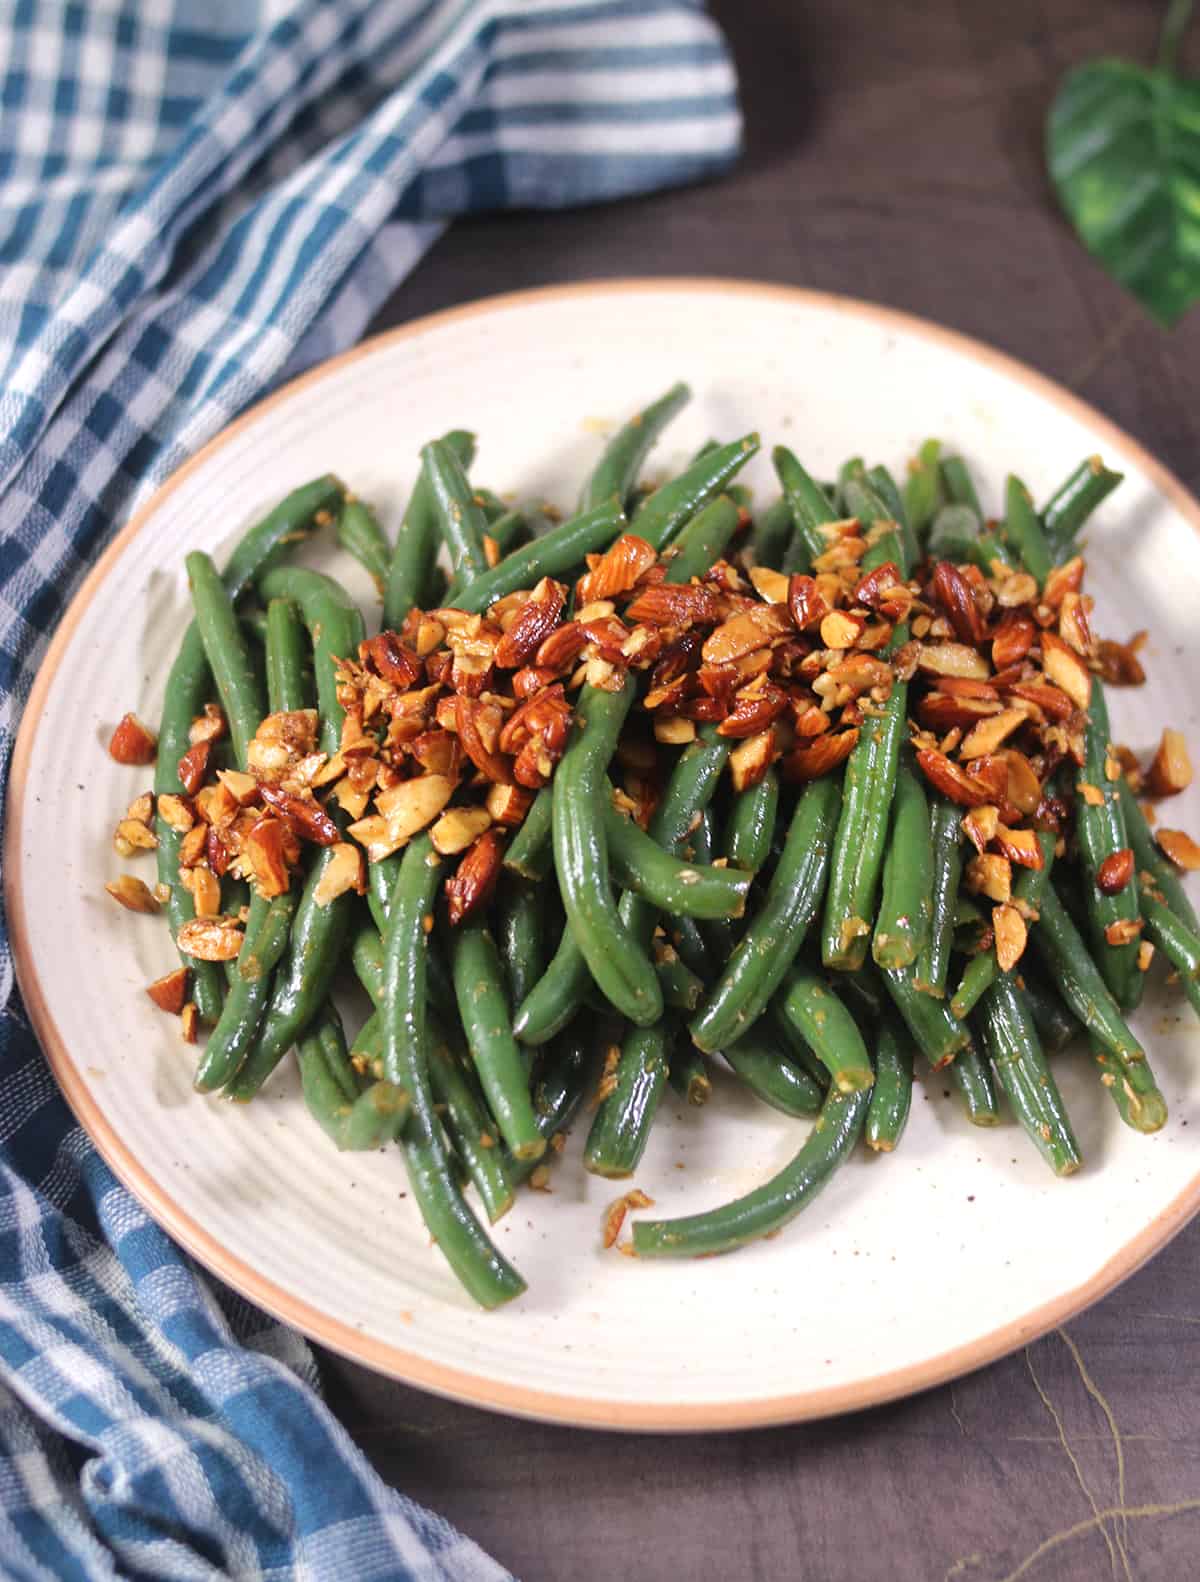 Best ad easy vegetable side dish in less than 15 minutes - green bean almondine recipe. 